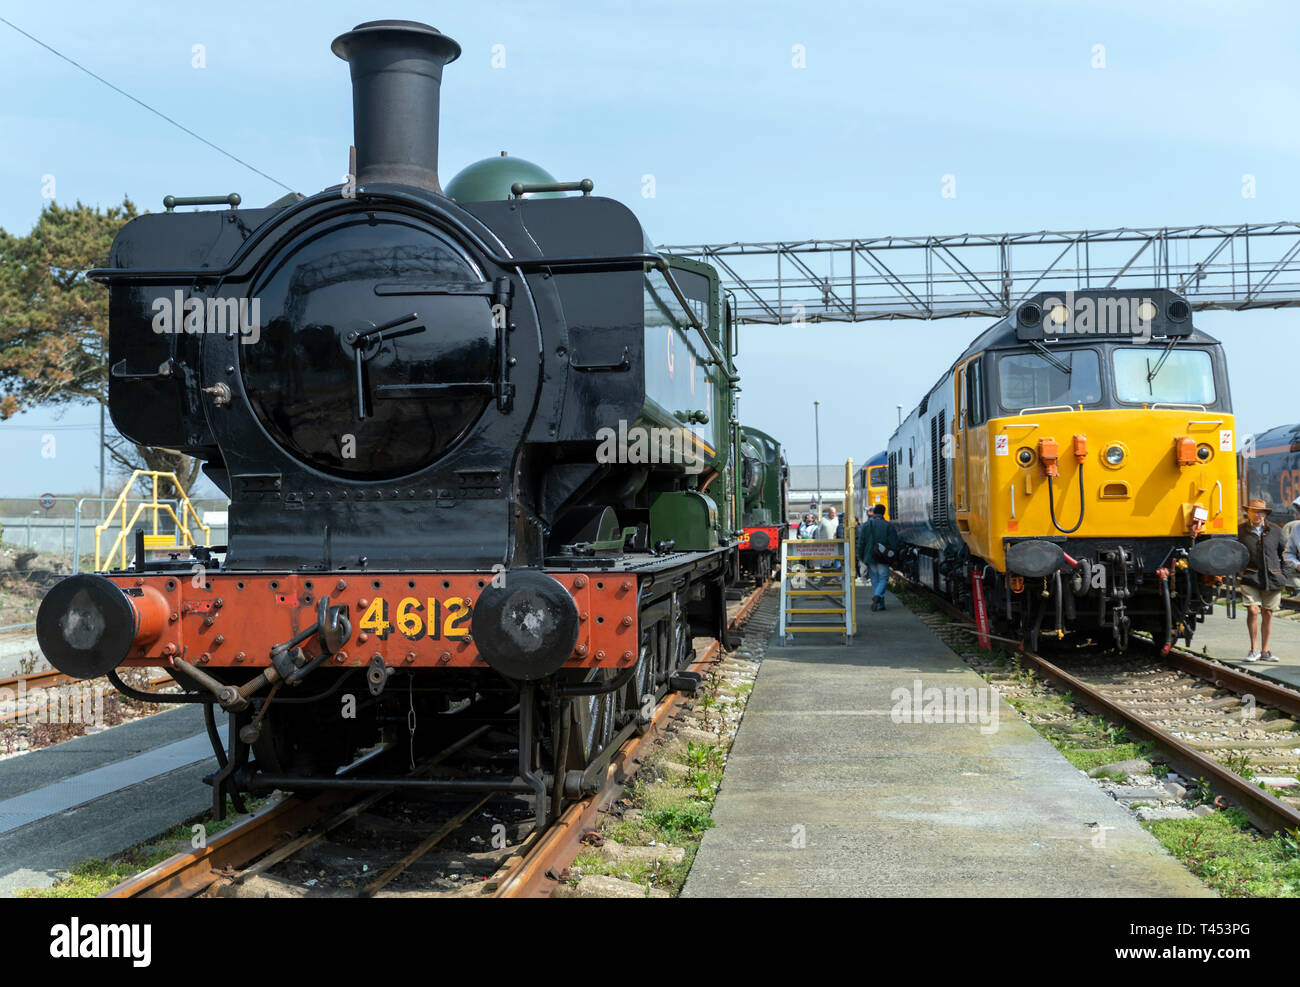 Long Rock, Penzance, UK. 13th April 2019. GWR 4612 Steam locomotive with Diesel engine in background Credit: Bob Sharples/Alamy Live News Stock Photo